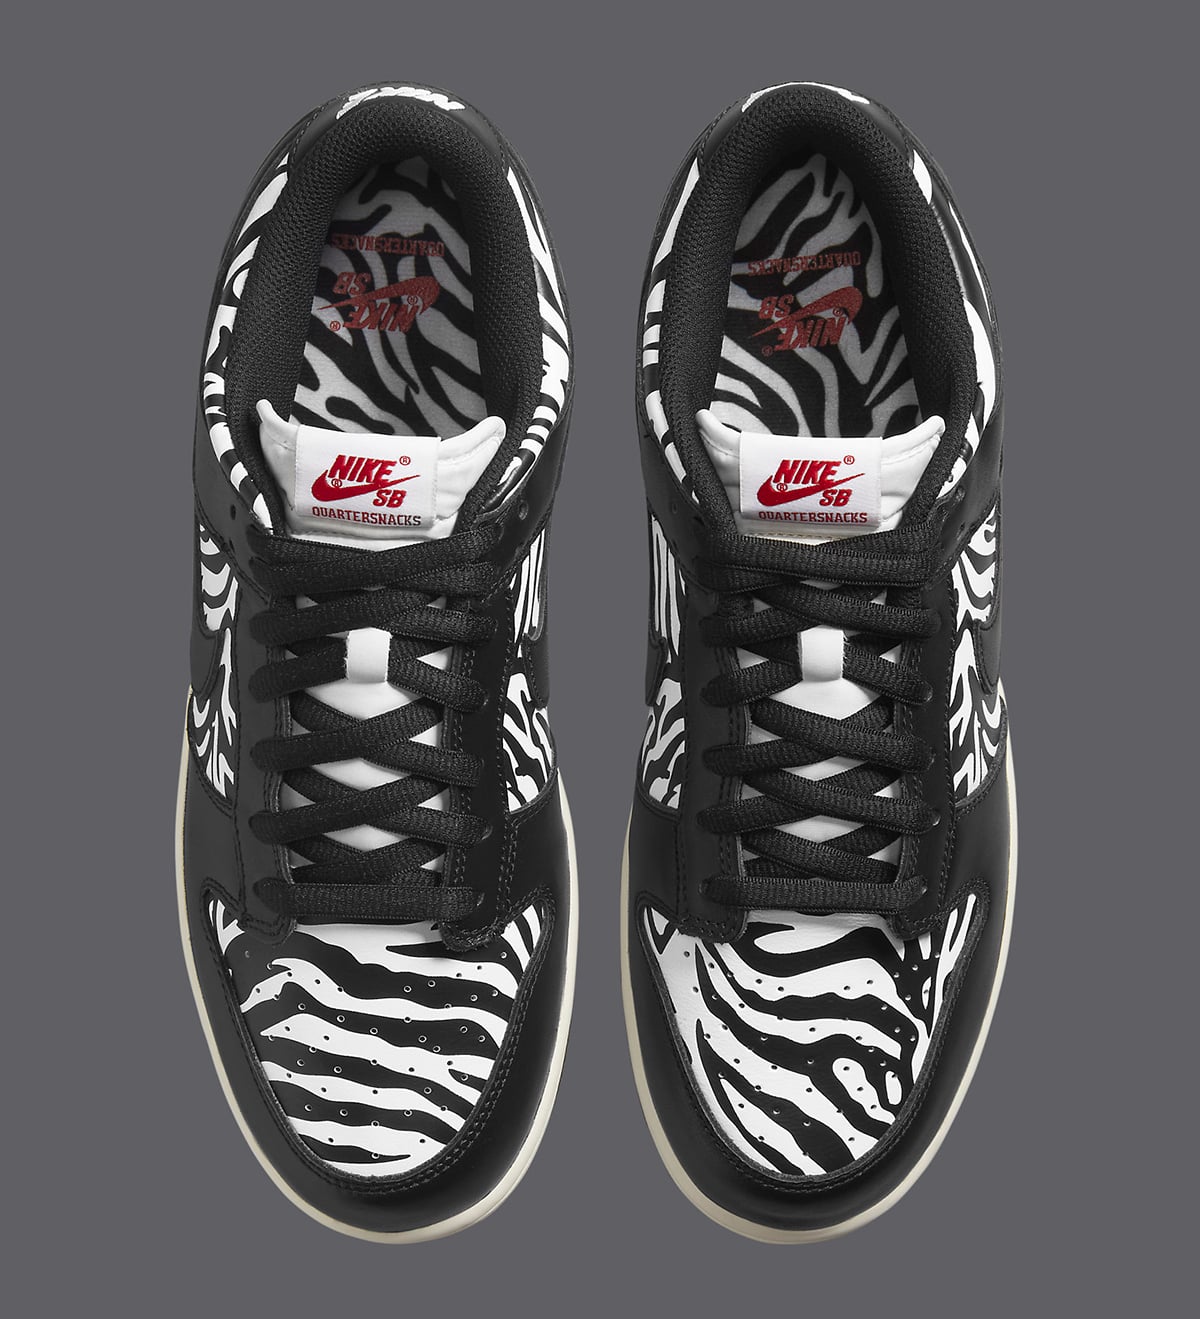 Official Images // Quartersnacks x Nike SB Dunk Low “Zebra Cakes” | House  of Heat°